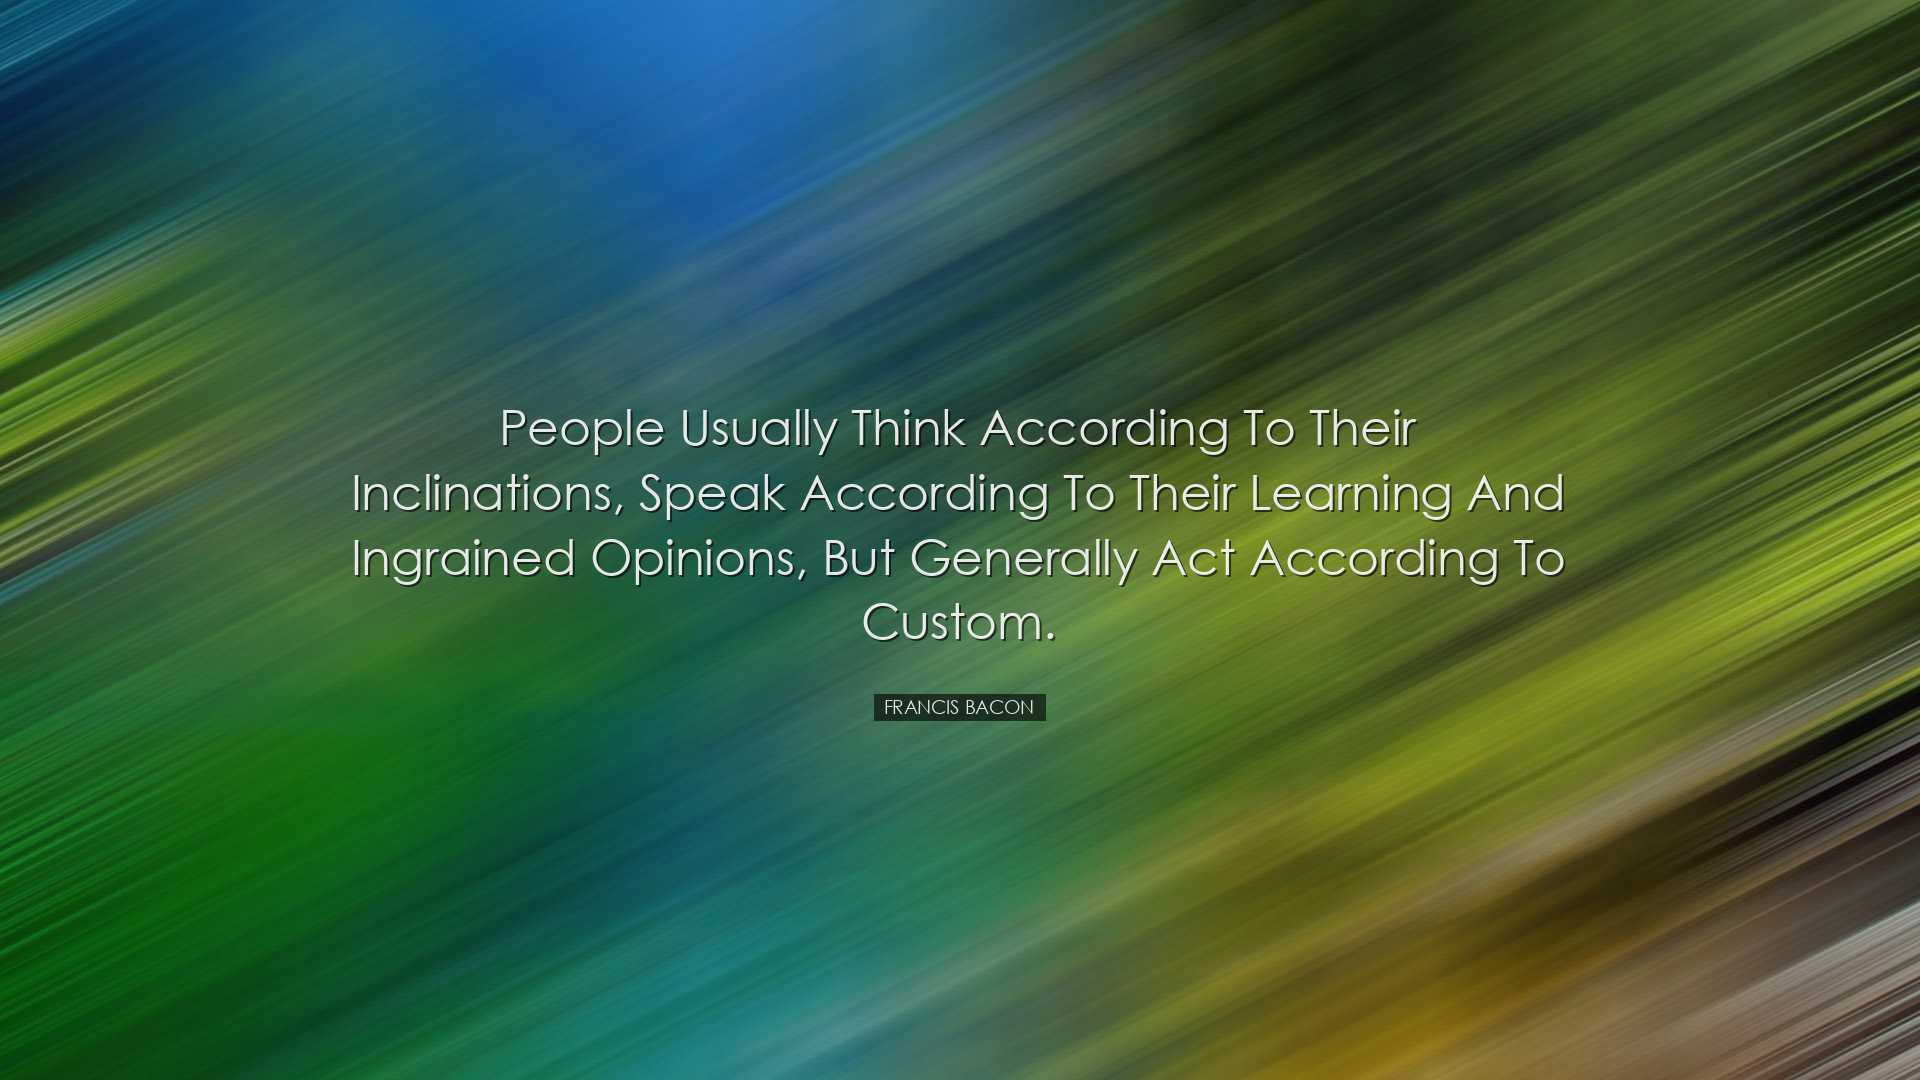 People usually think according to their inclinations, speak accord